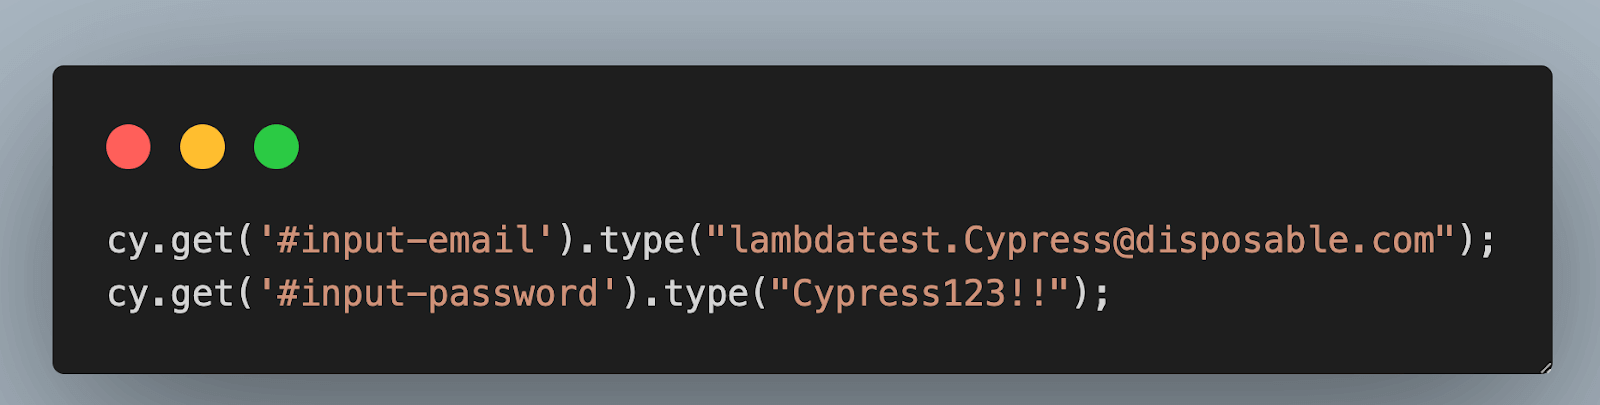 cy.get().type() command.